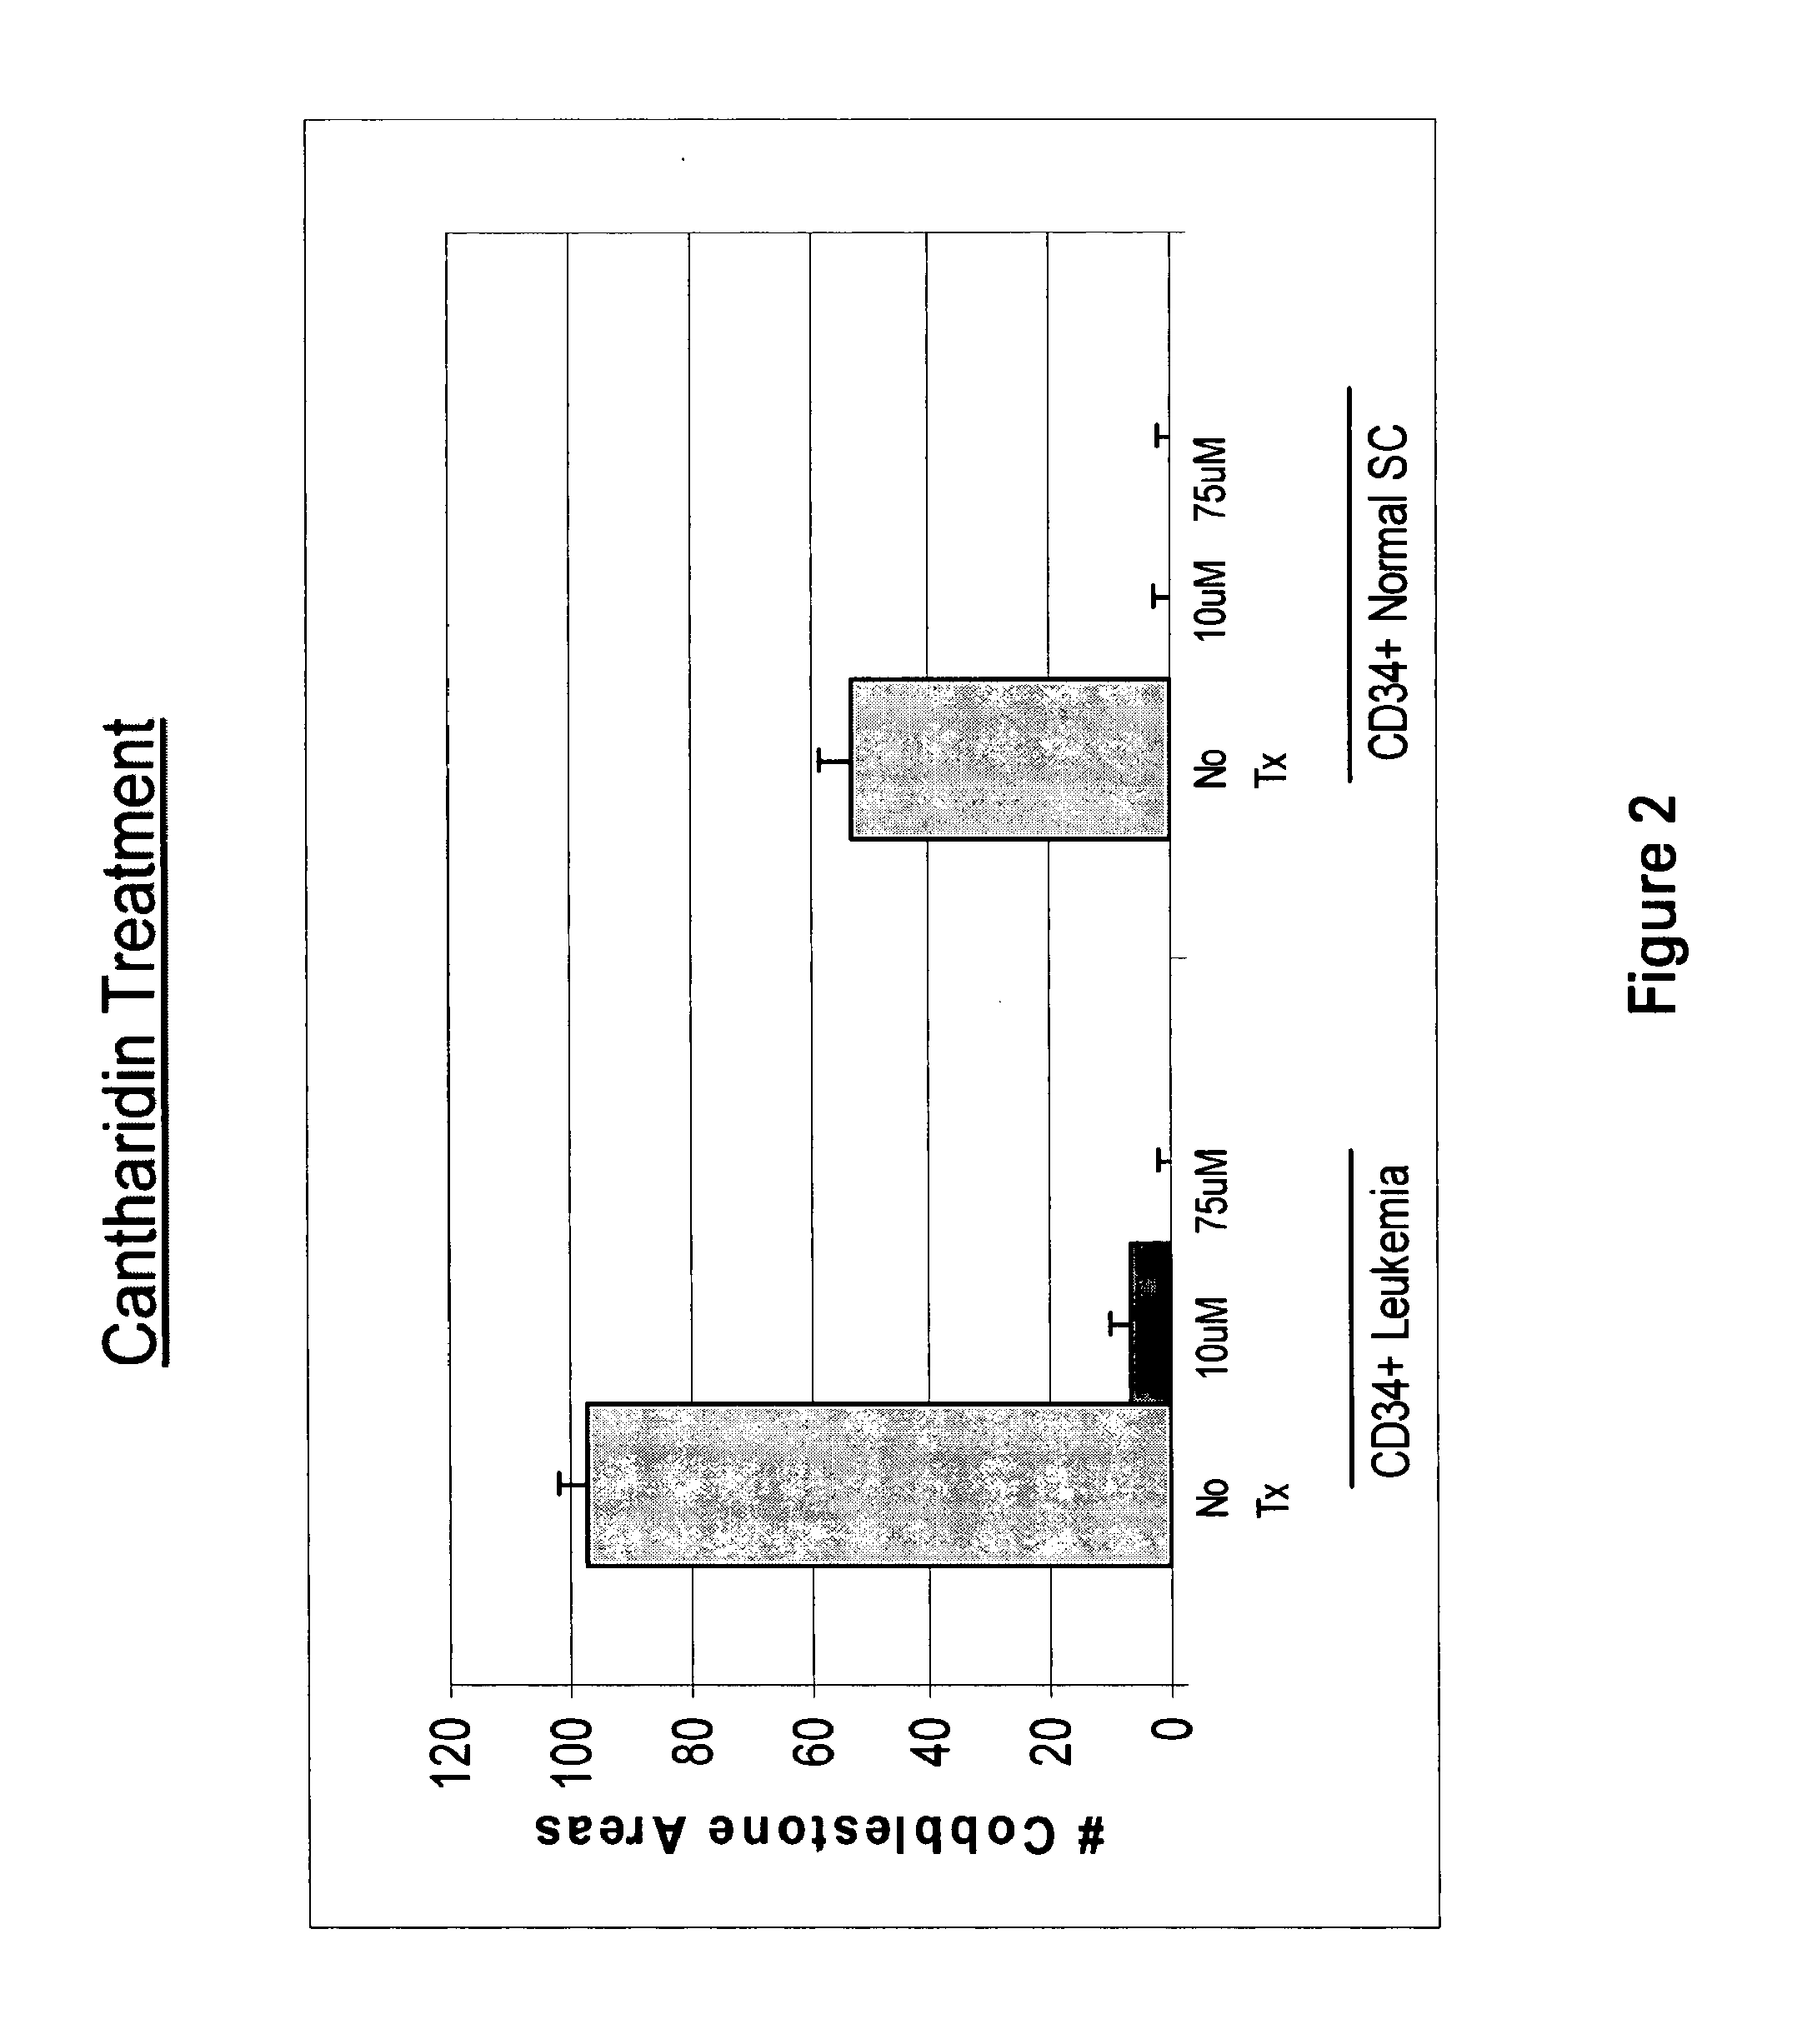 Cancer Therapy With Cantharidin And Cantharidin Analogs